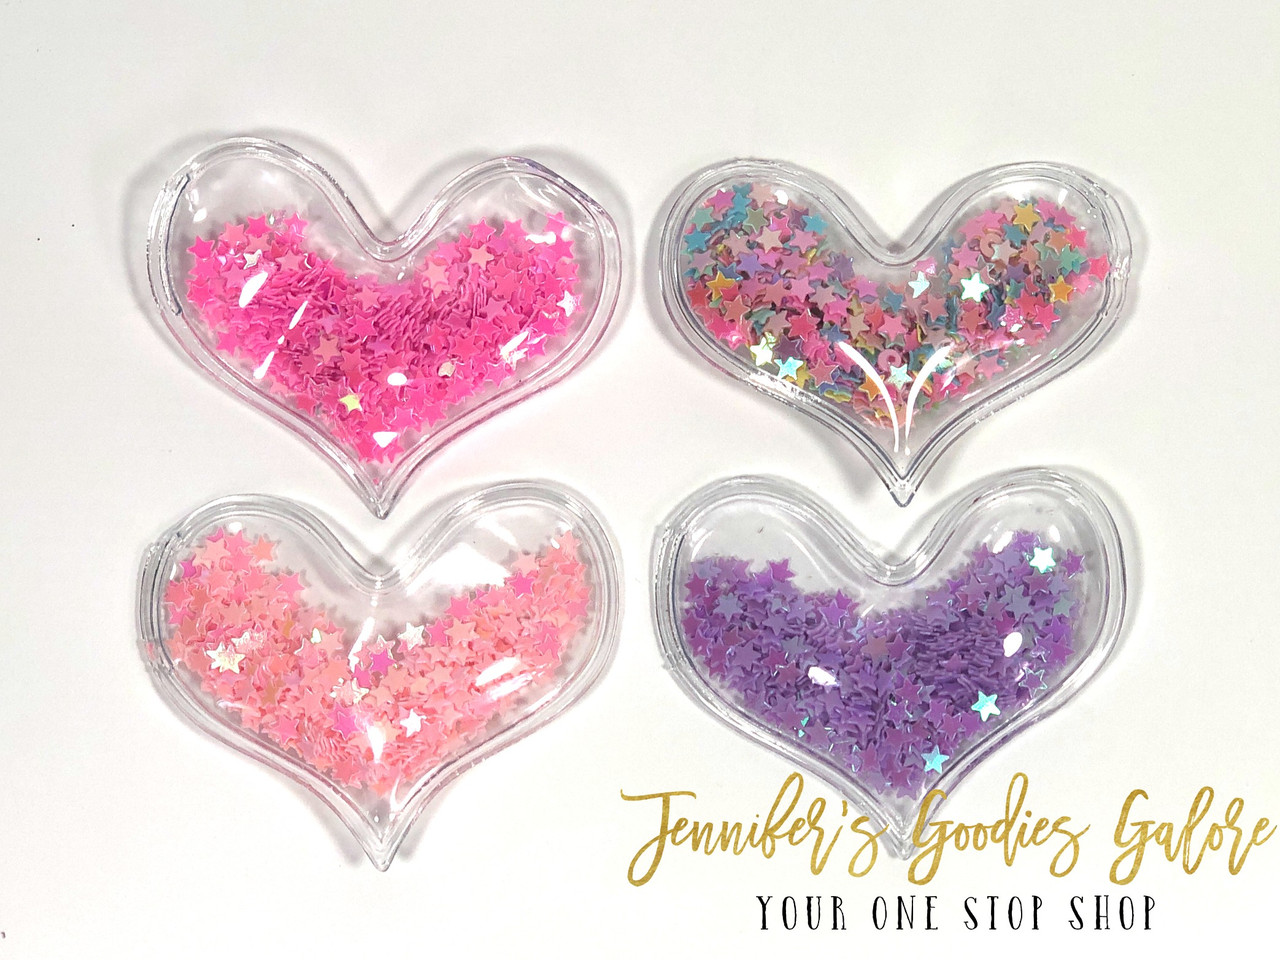 59*46mm, Sequin Shaker, Clear Heart, Snap Covers, Colorful Glitter Confetti, Kids Girls Hair Decoration Accessories, Star Sequins, 5PCS - Jennifer's Goodies Galore